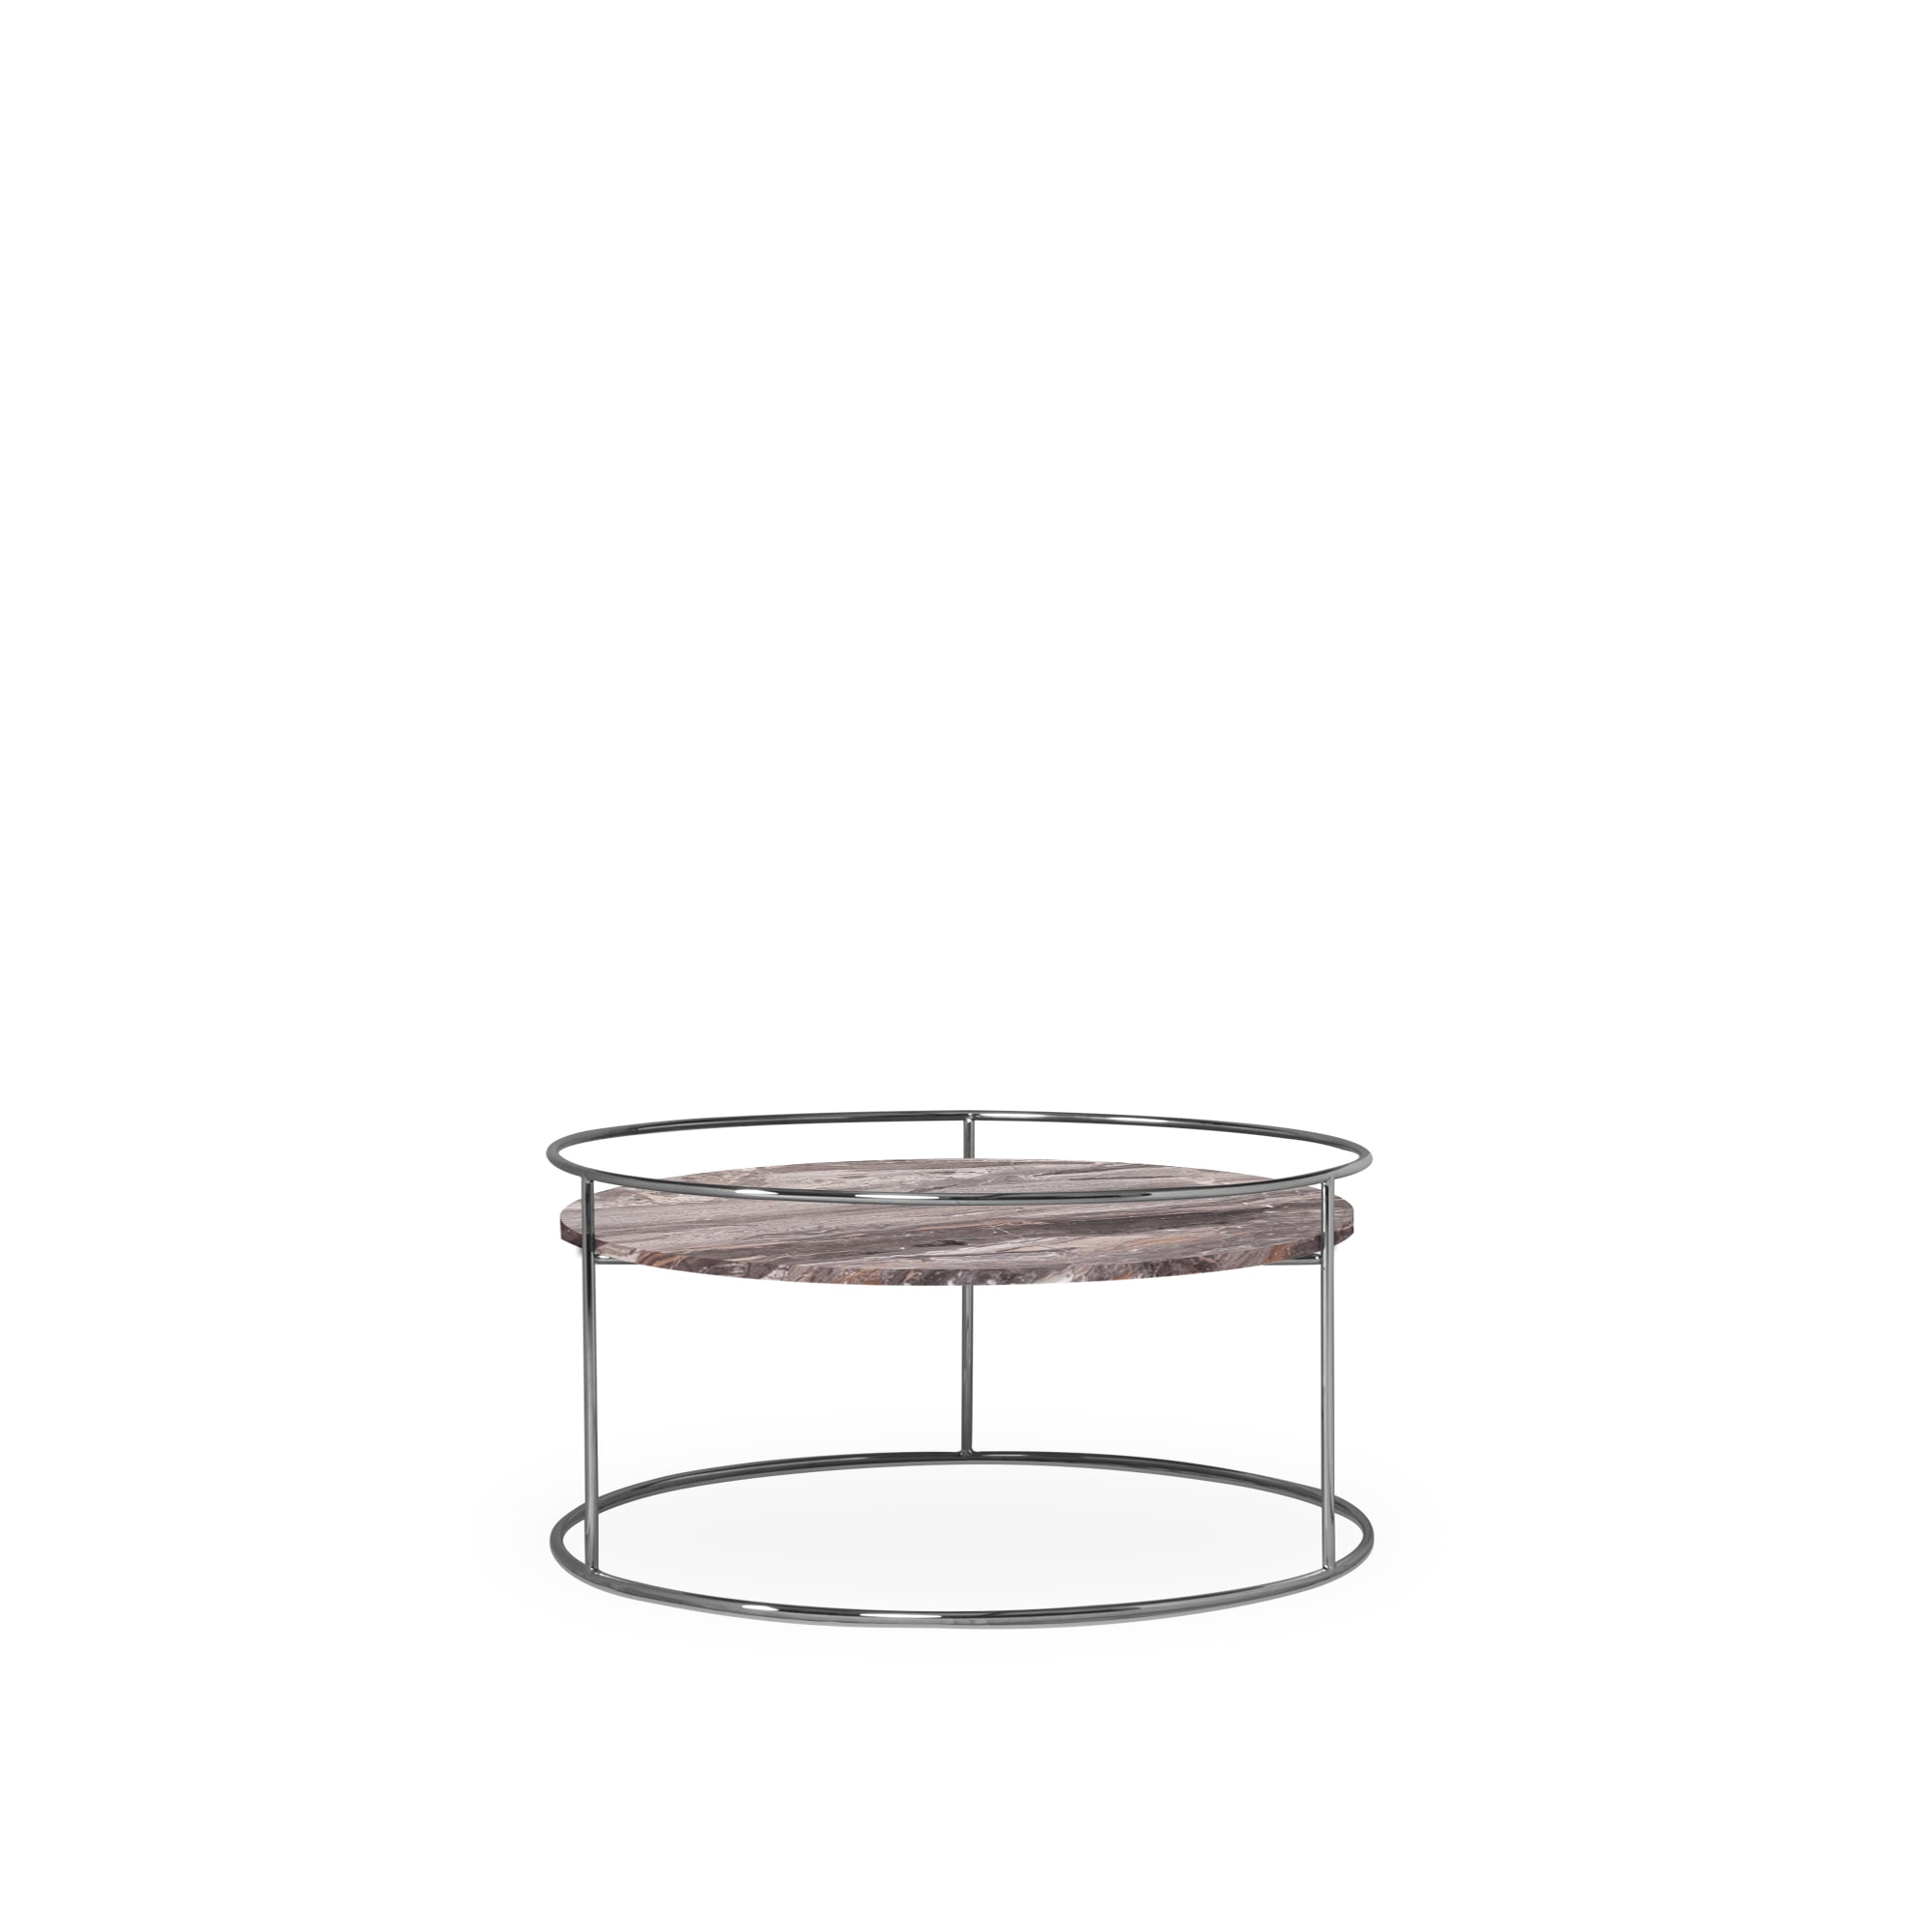 Gabo C 2 | Art Series | Decasa Marble Marble Dining Table